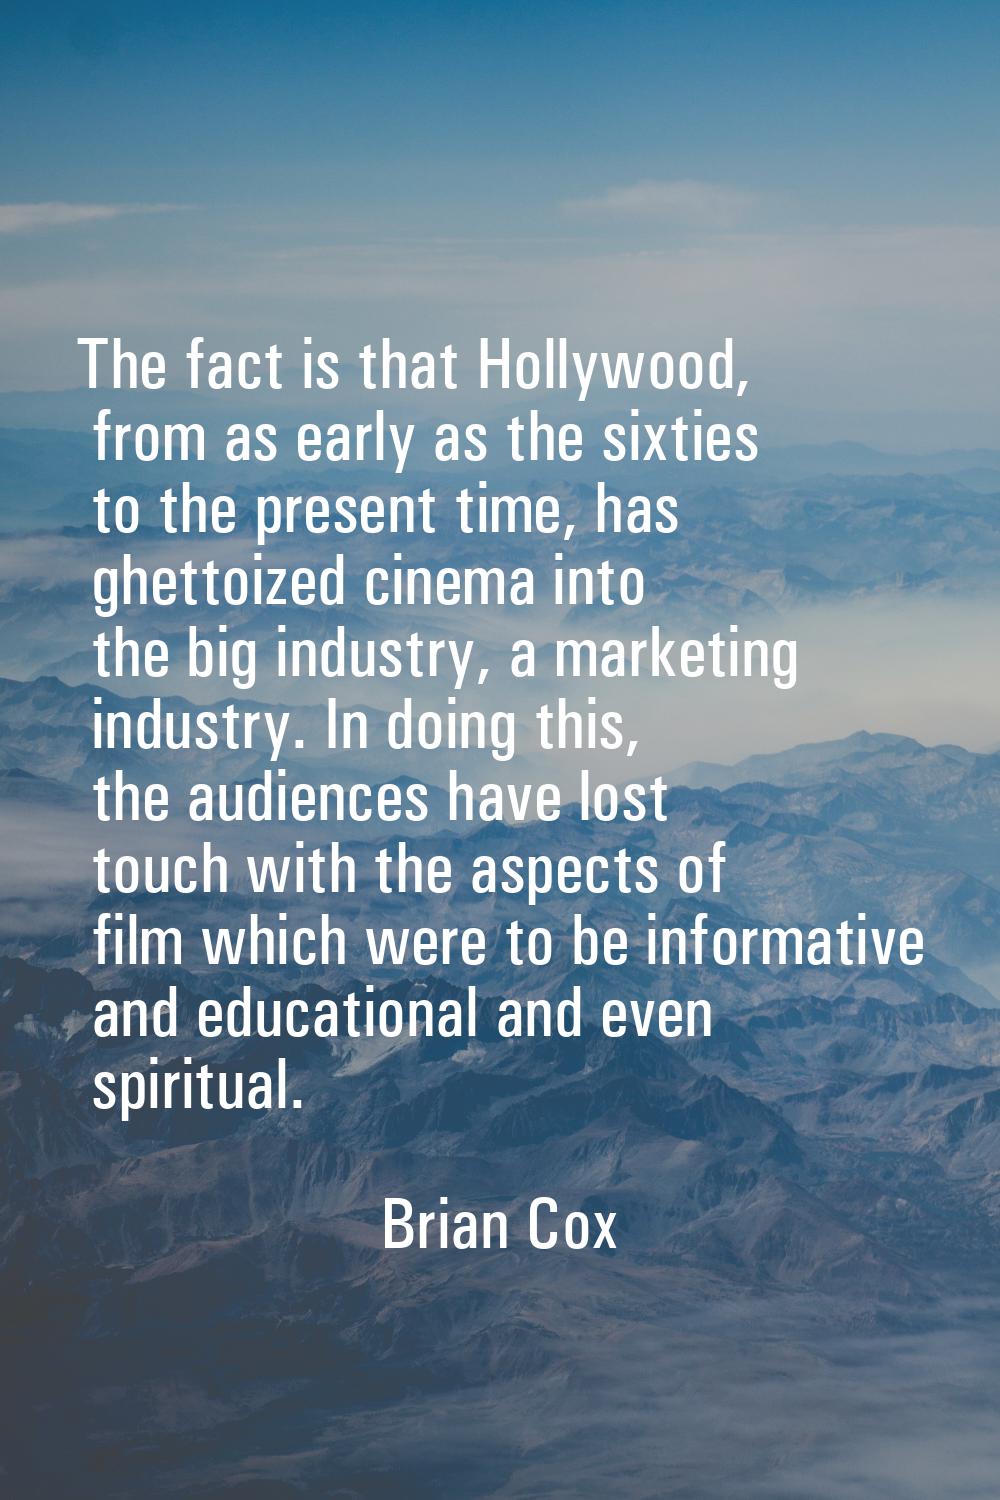 The fact is that Hollywood, from as early as the sixties to the present time, has ghettoized cinema